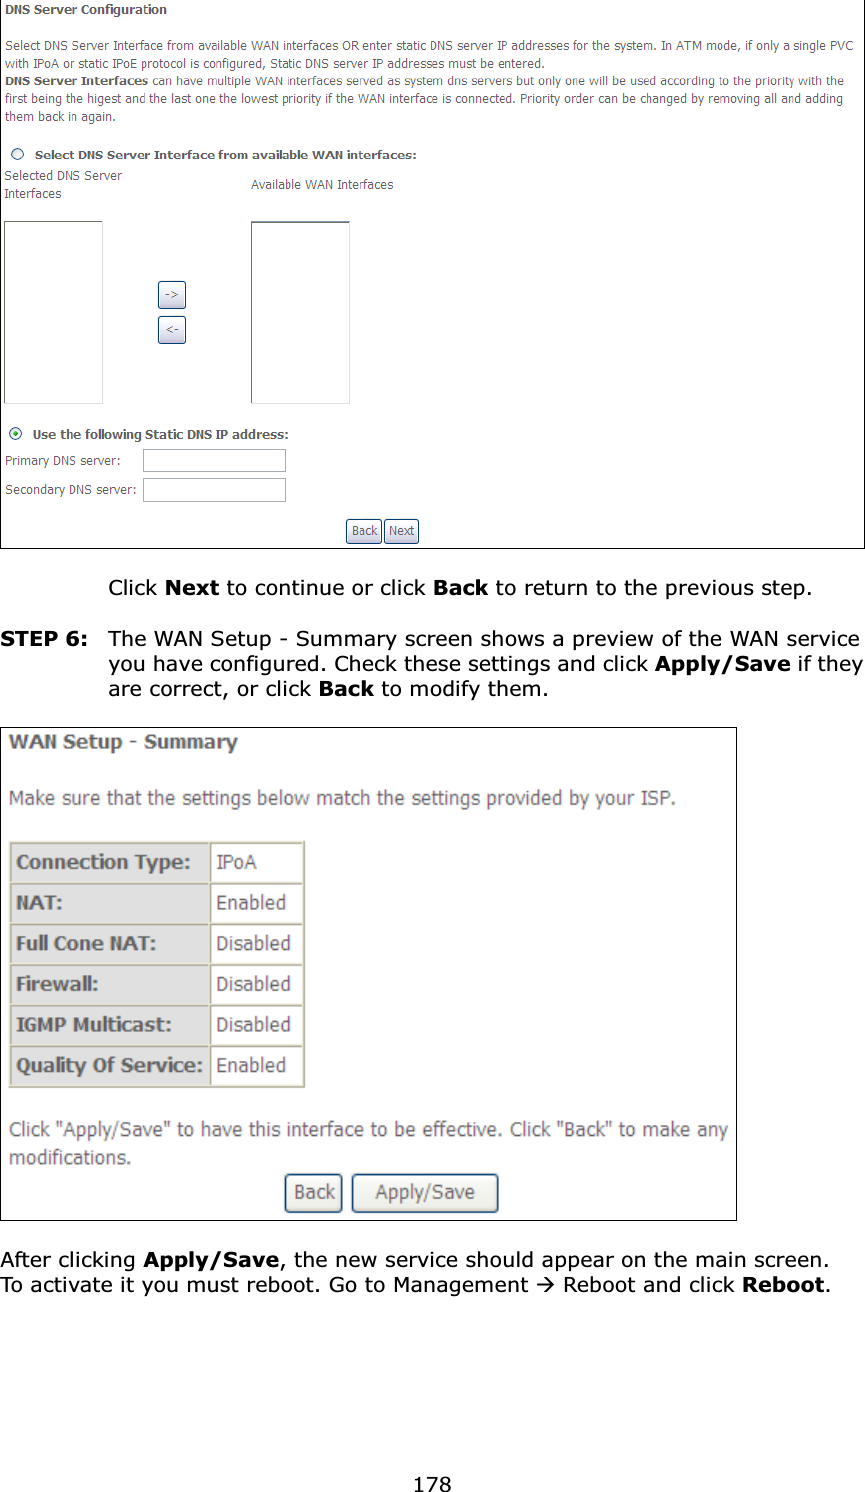  178   Click Next to continue or click Back to return to the previous step.  STEP 6:  The WAN Setup - Summary screen shows a preview of the WAN service you have configured. Check these settings and click Apply/Save if they are correct, or click Back to modify them.    After clicking Apply/Save, the new service should appear on the main screen.   To activate it you must reboot. Go to Management  Reboot and click Reboot.       